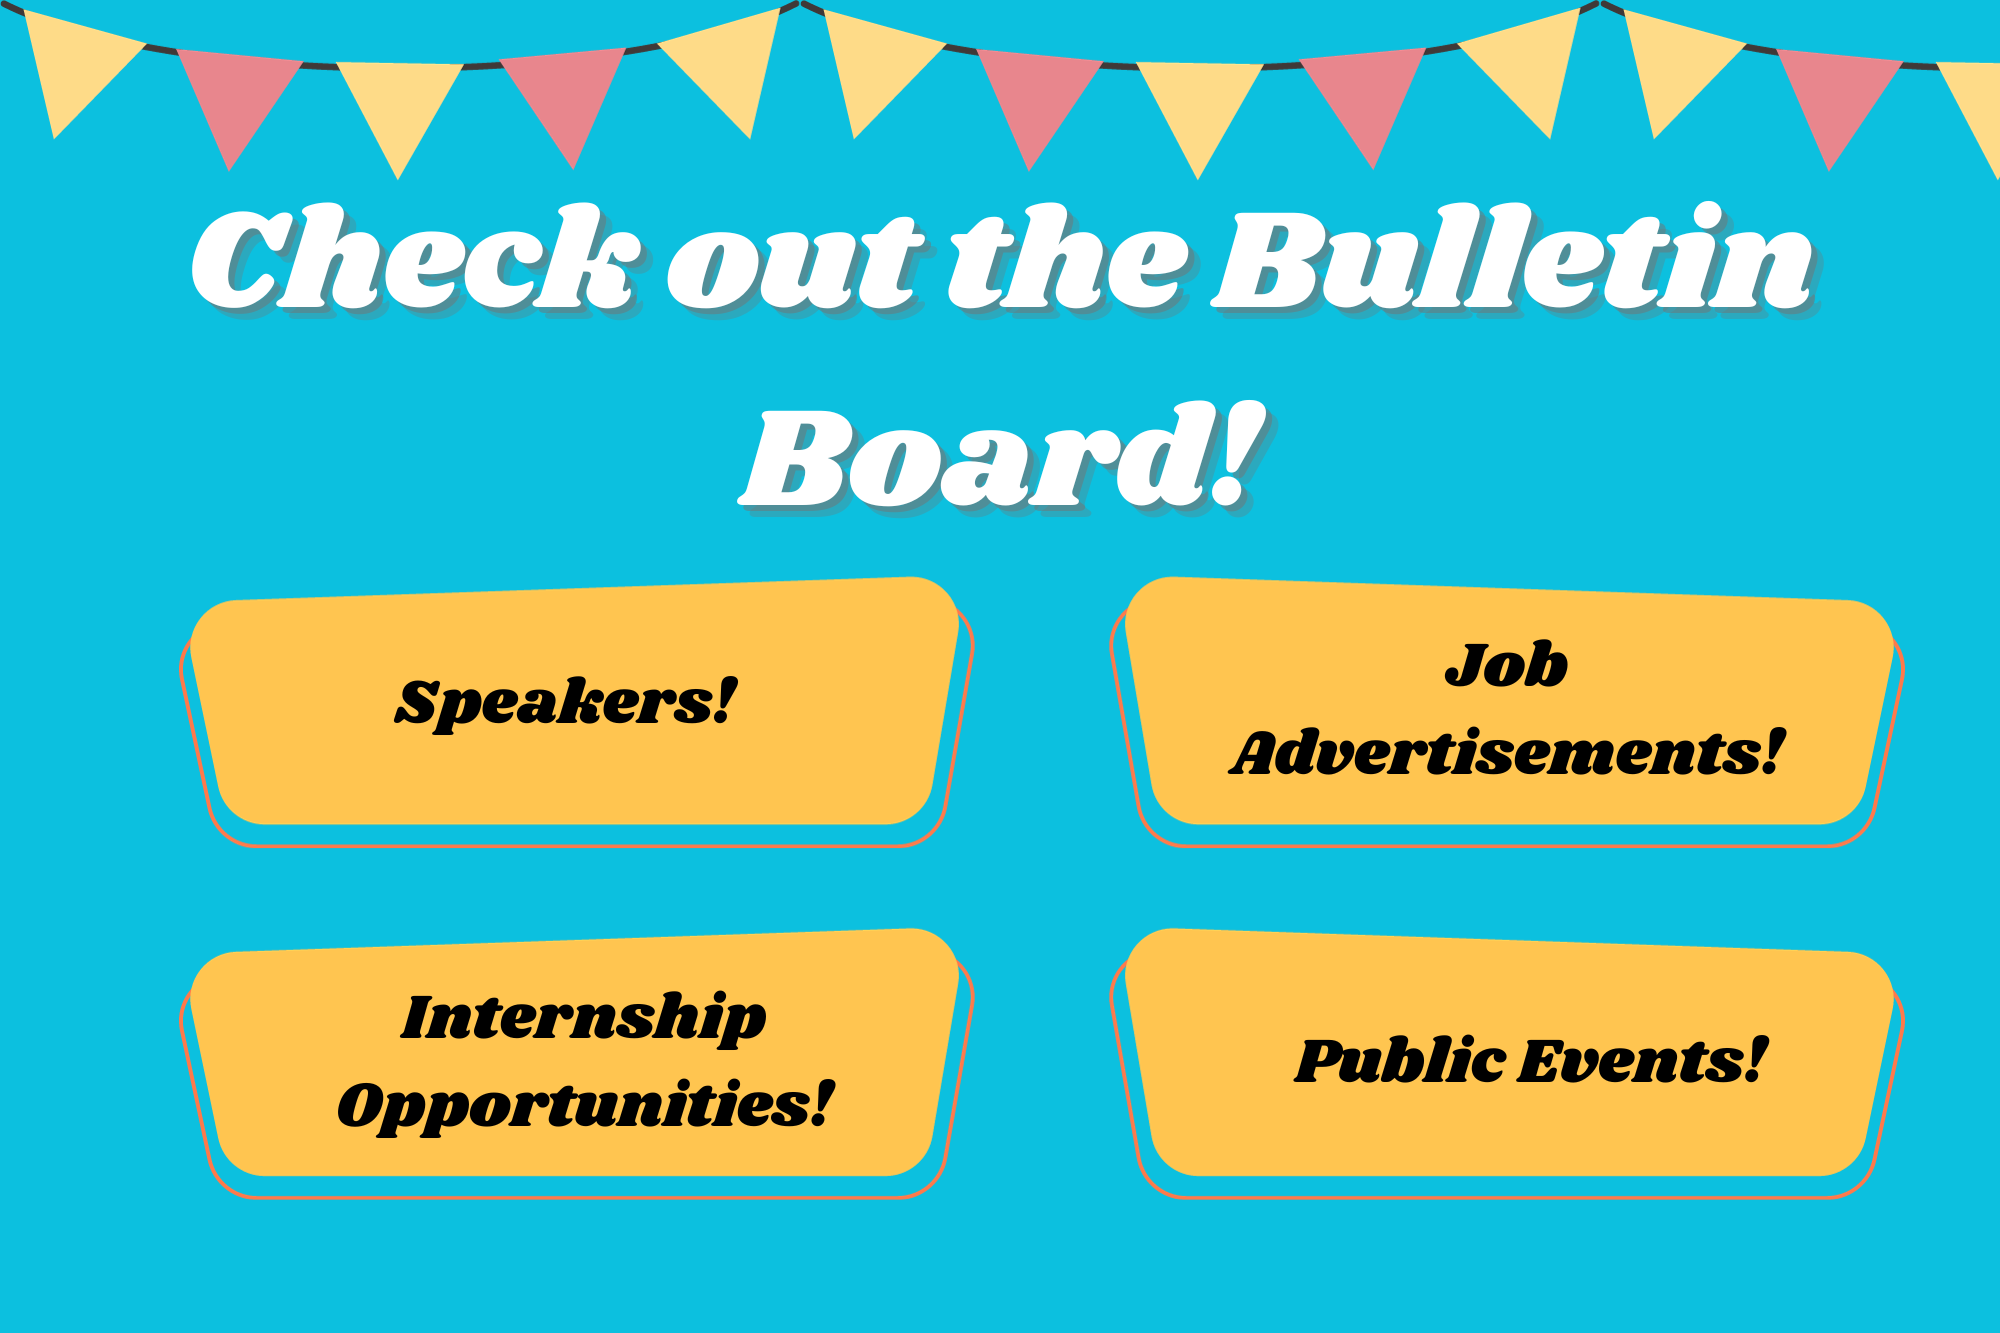 slide about bulletin board contents with a link